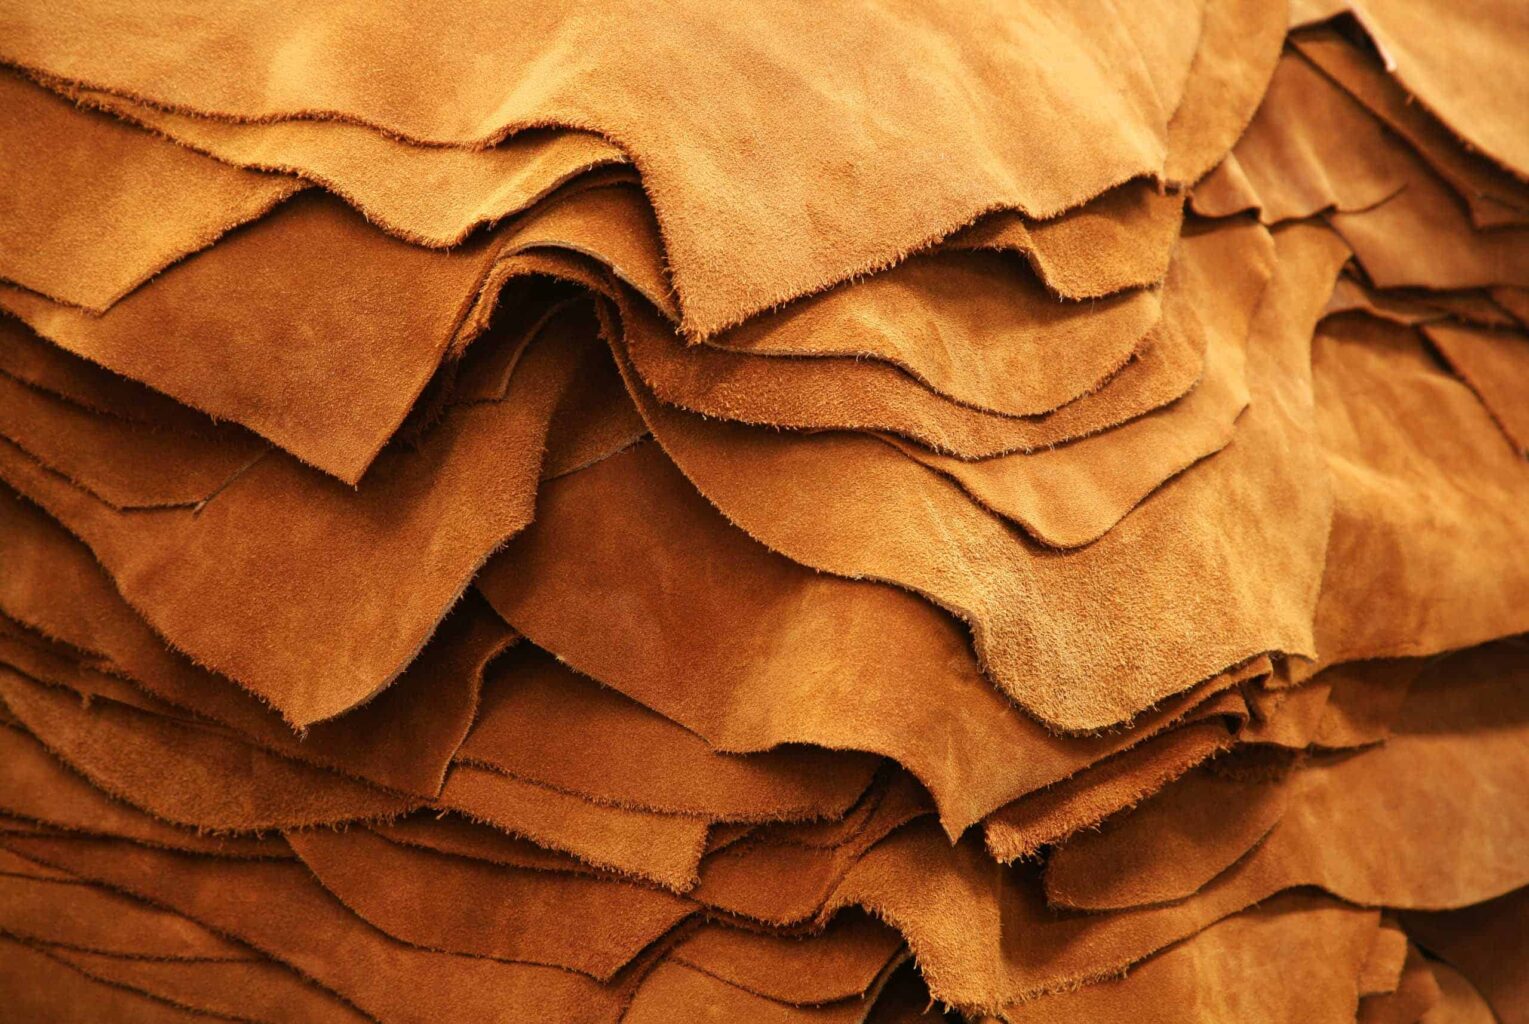 Layers of leather material.